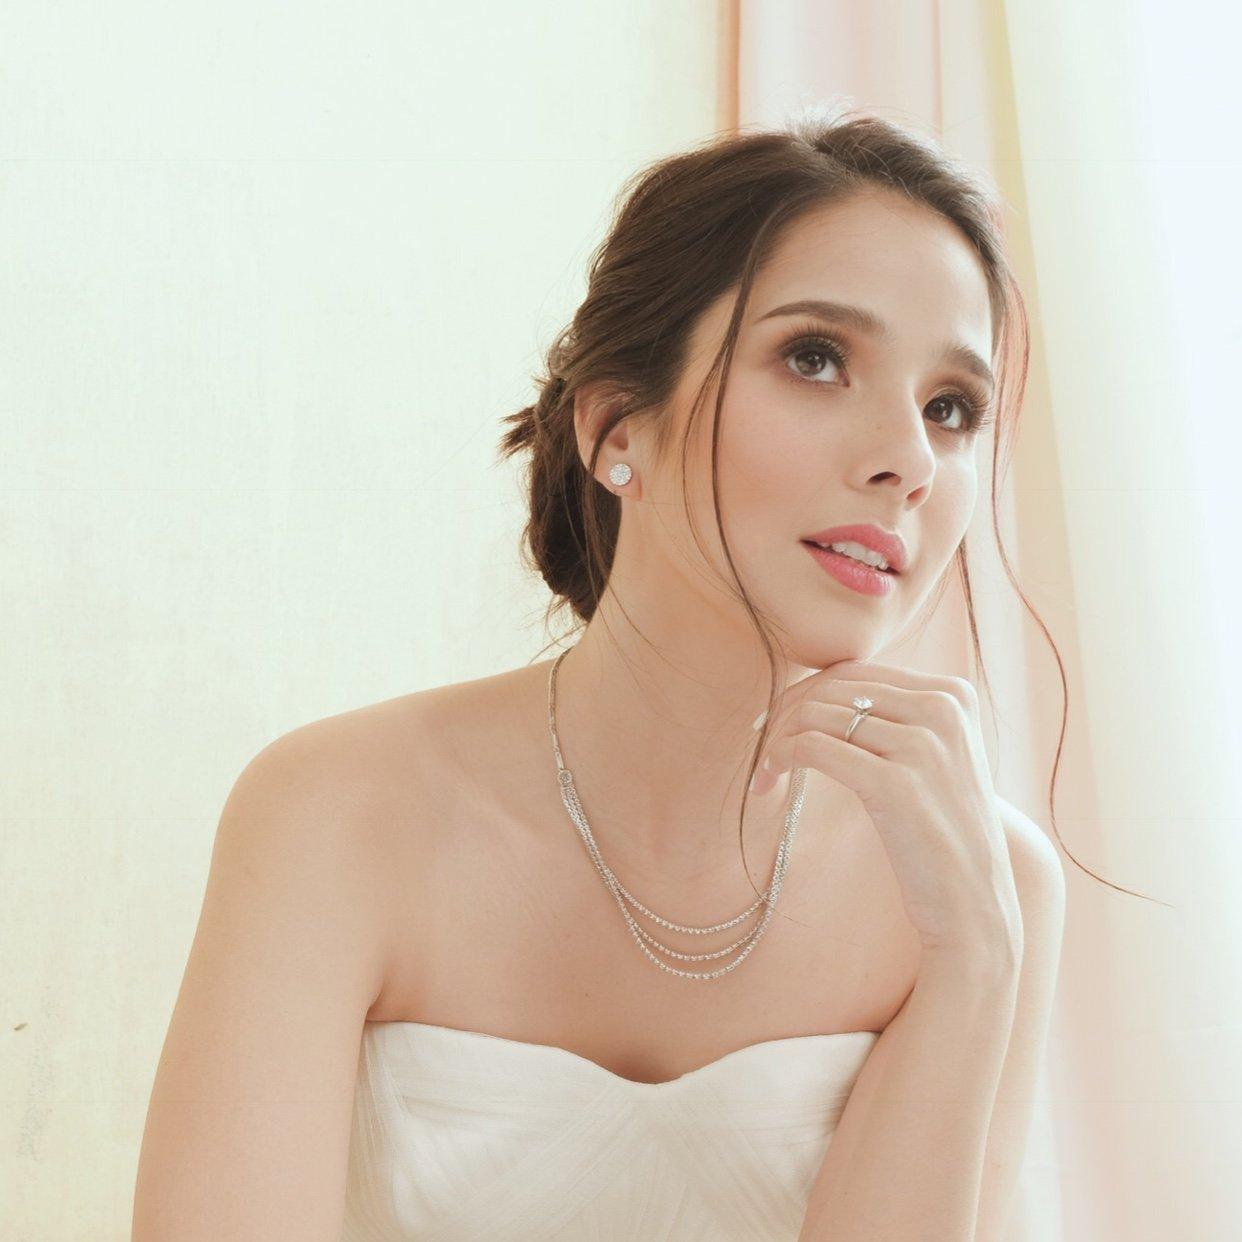 Hot Pictures Of Maxene Magalona Which Will Make You Crave For Her